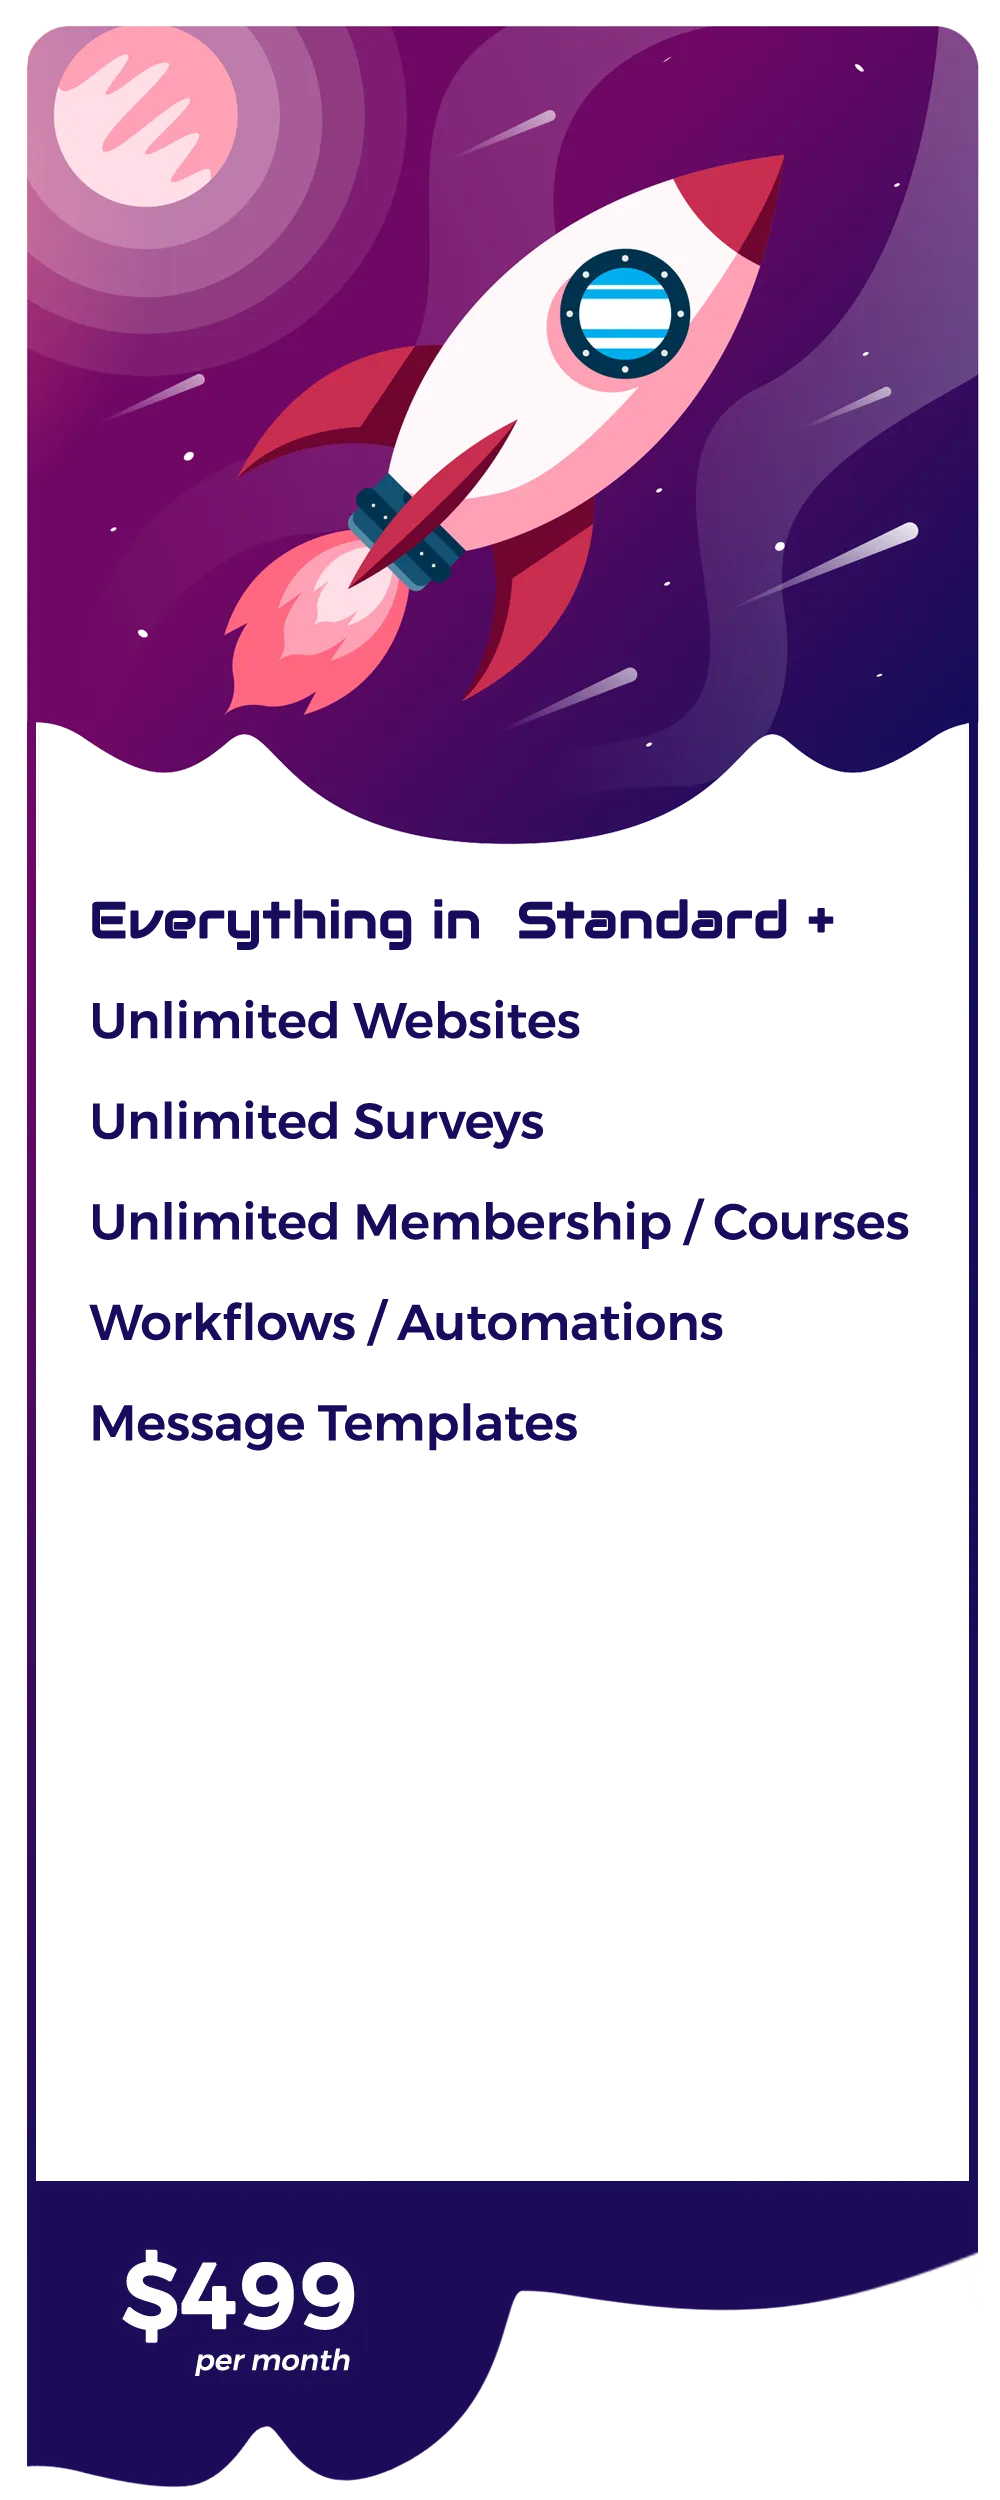 LeadLenz Professional Tier - Everything in Standard, Unlimited Websites, Unlimited Surveys, Unlimited Membership Courses, Automations, Reputation Management - $499 /month